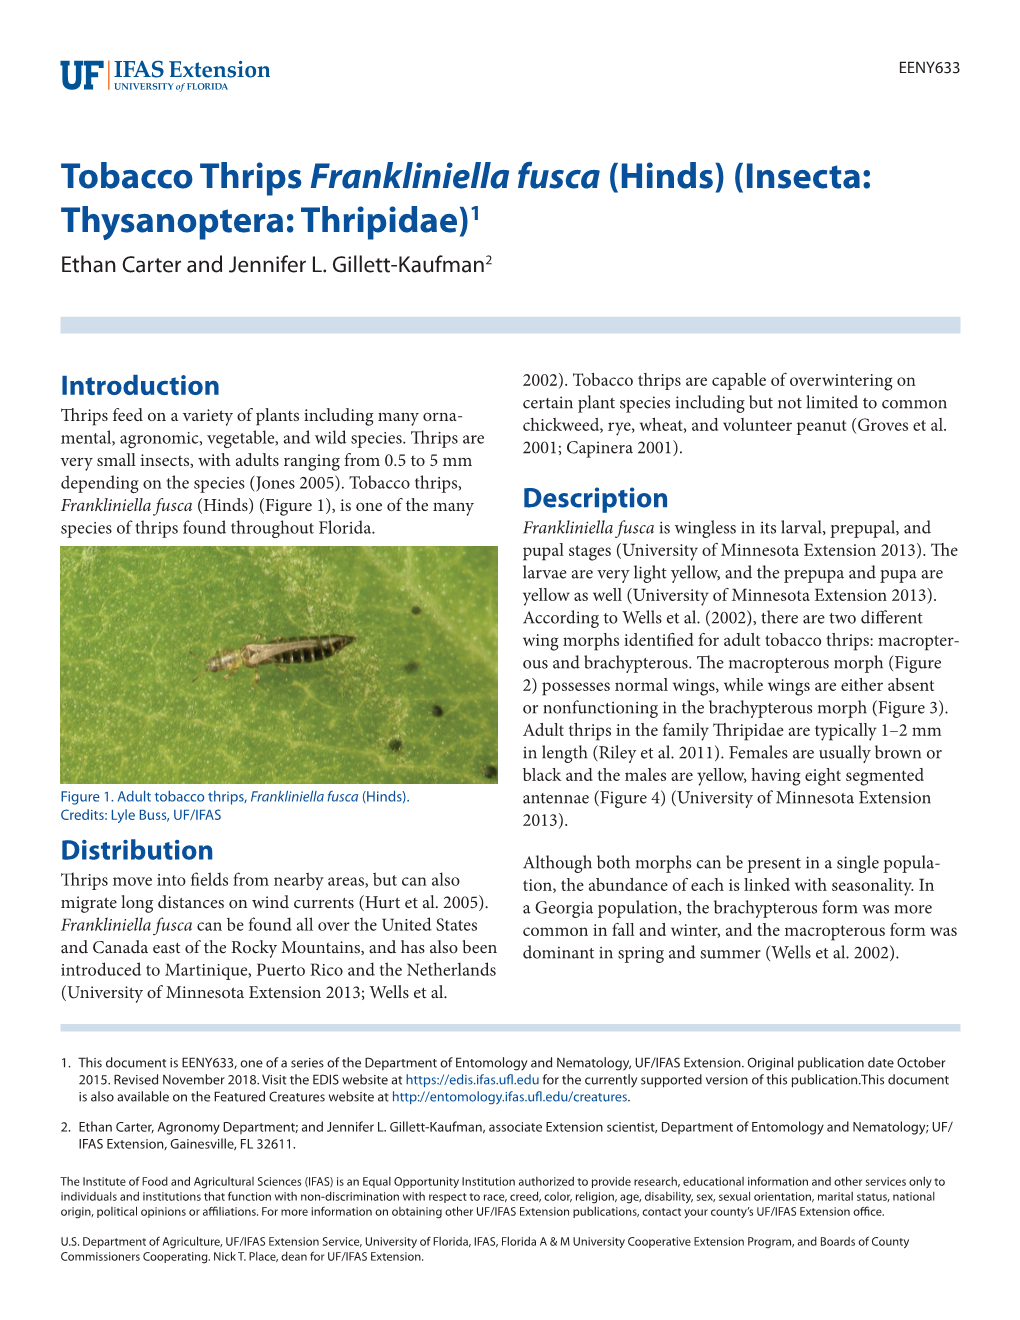 Tobacco Thrips Frankliniella Fusca (Hinds) (Insecta: Thysanoptera: Thripidae)1 Ethan Carter and Jennifer L